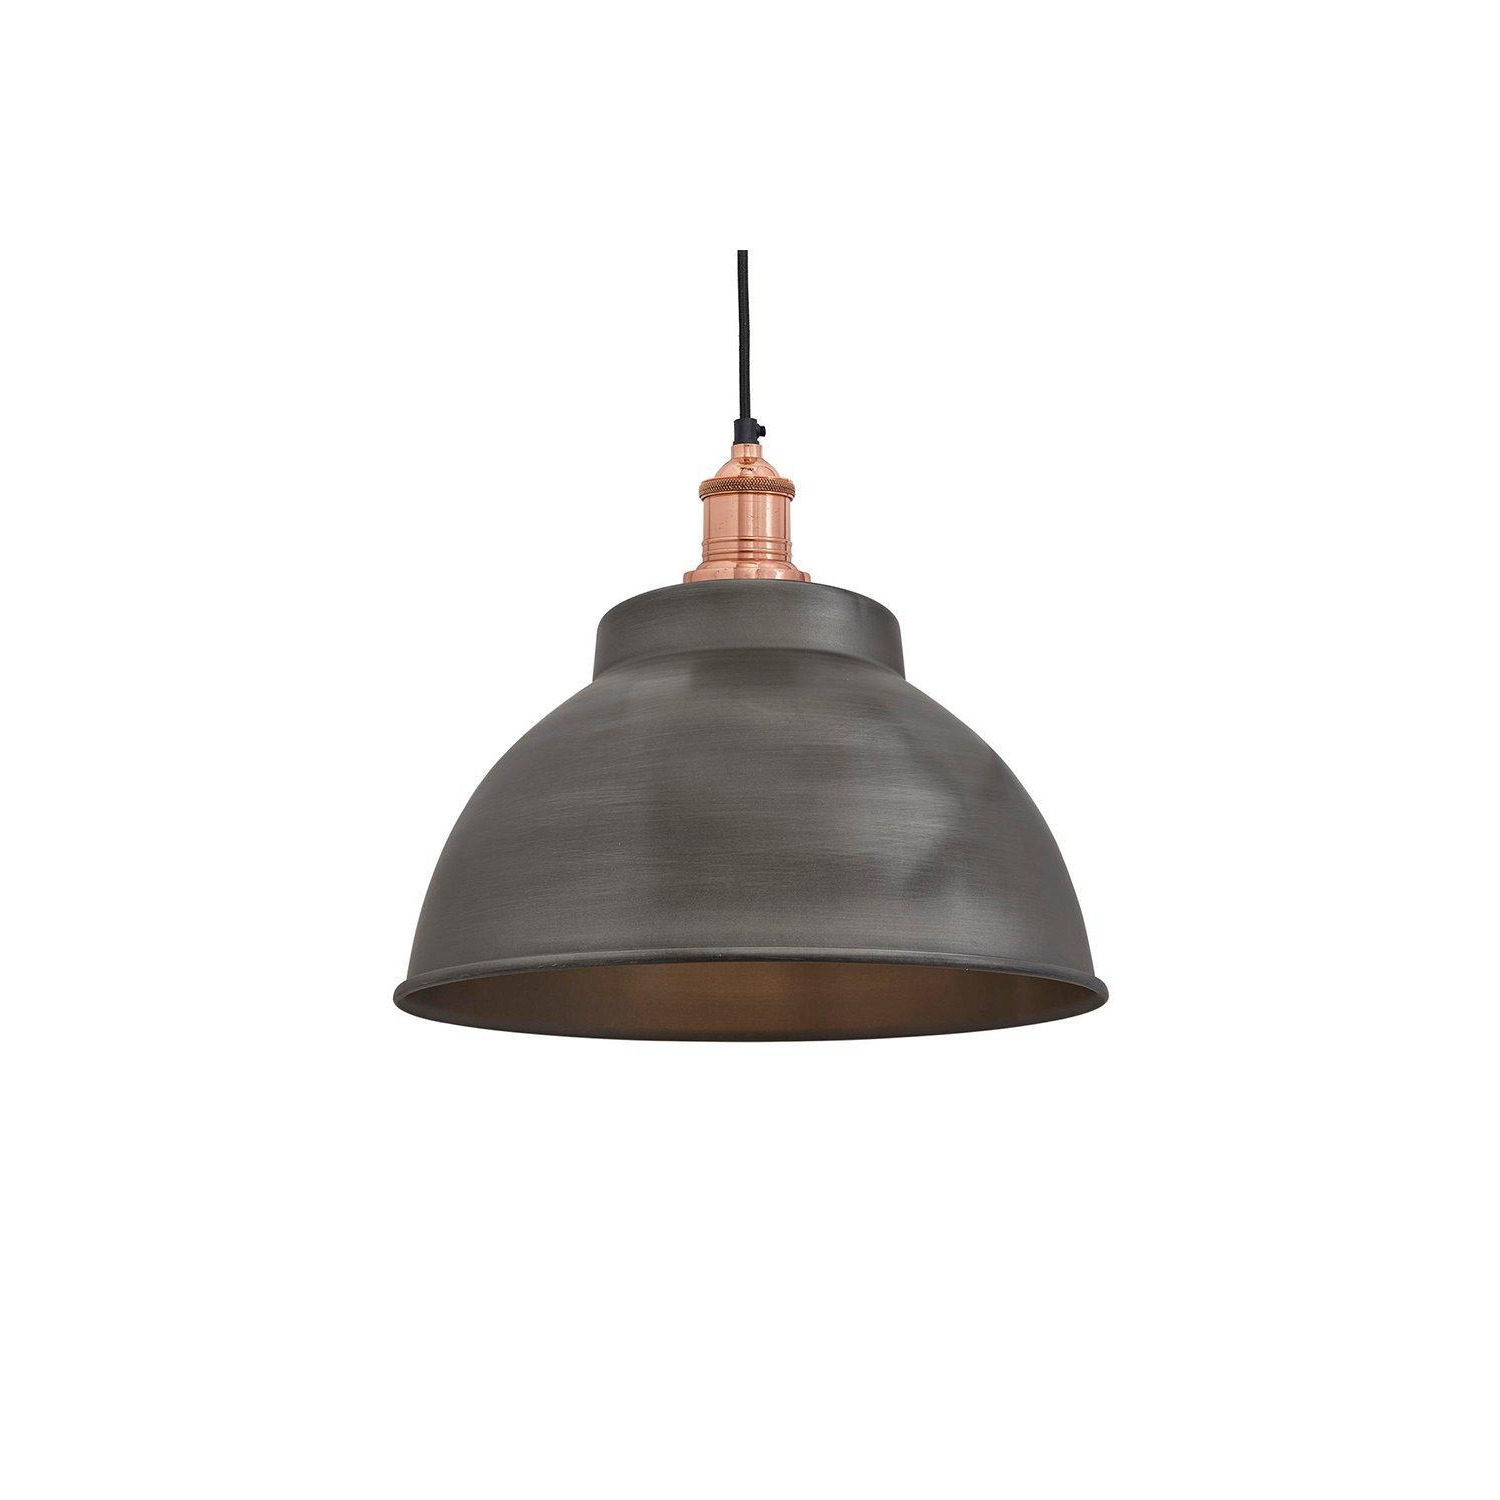 Brooklyn Dome Pendant, 13 Inch, Pewter, Copper Holder - image 1